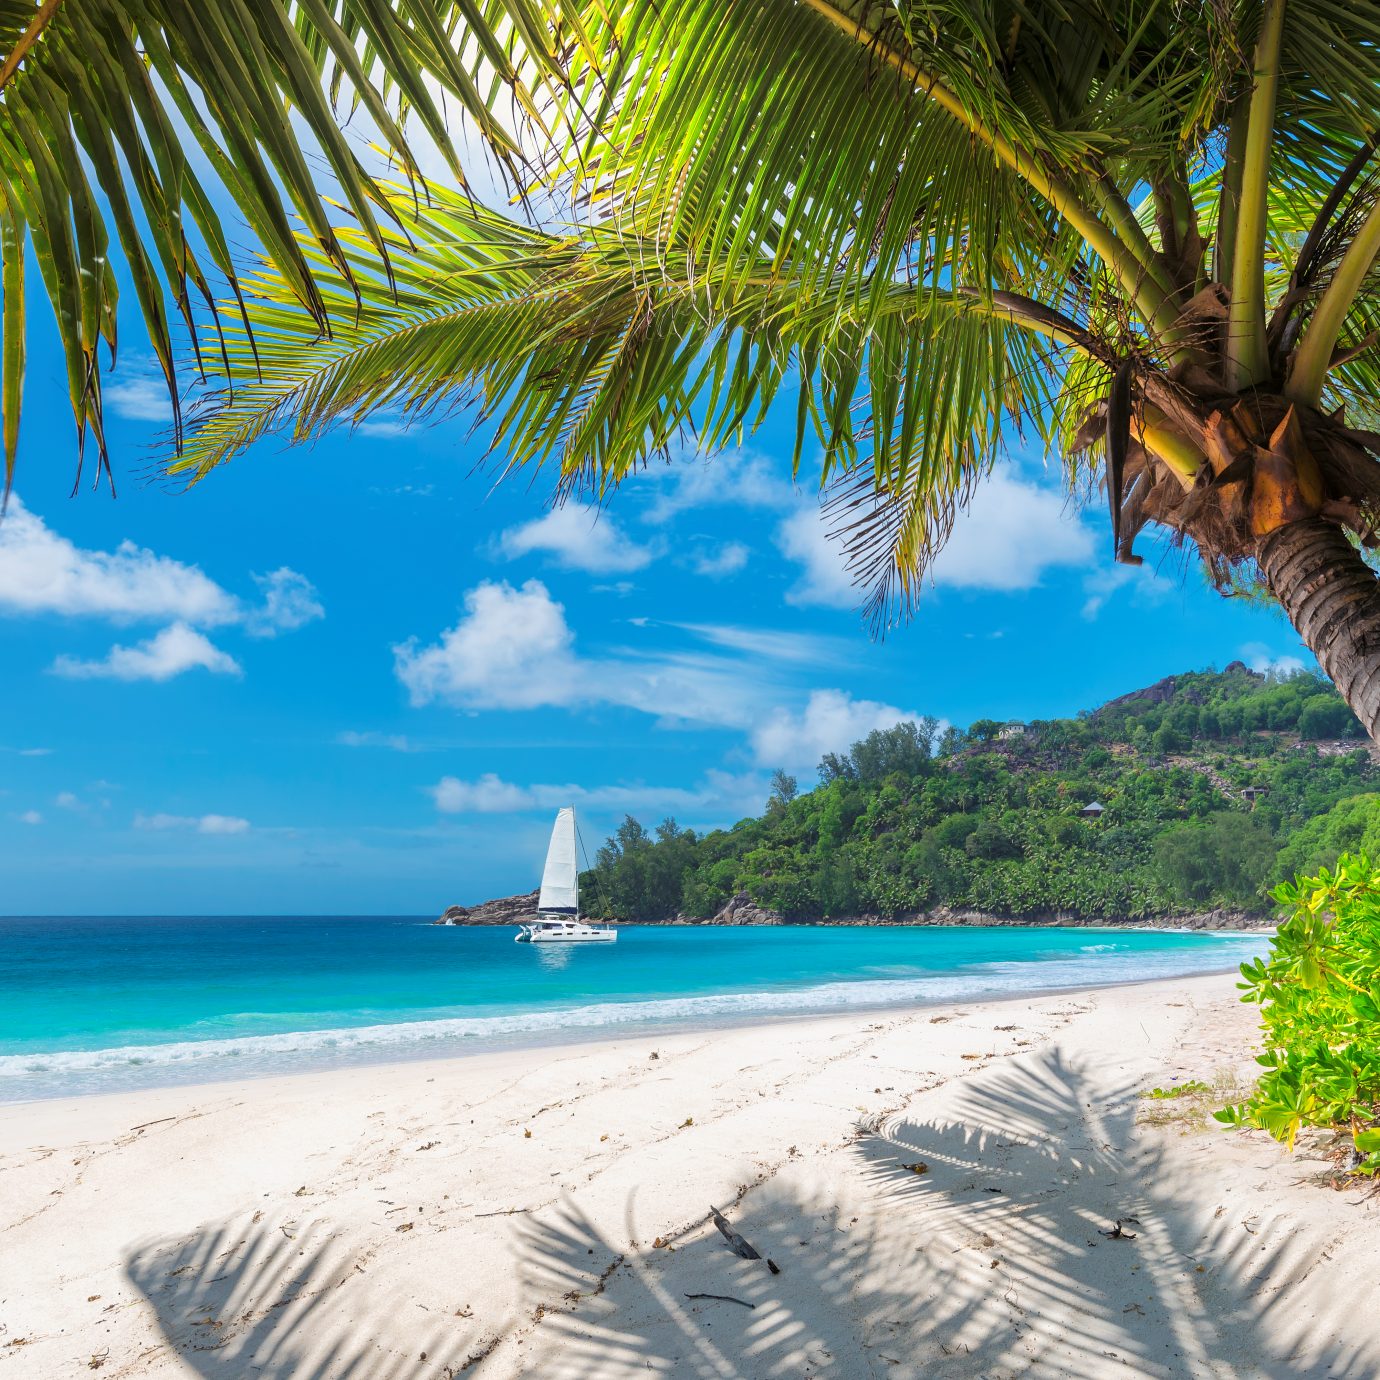 Sandy beach with palm trees and a sailing boat in the turquoise sea on Paradise island.